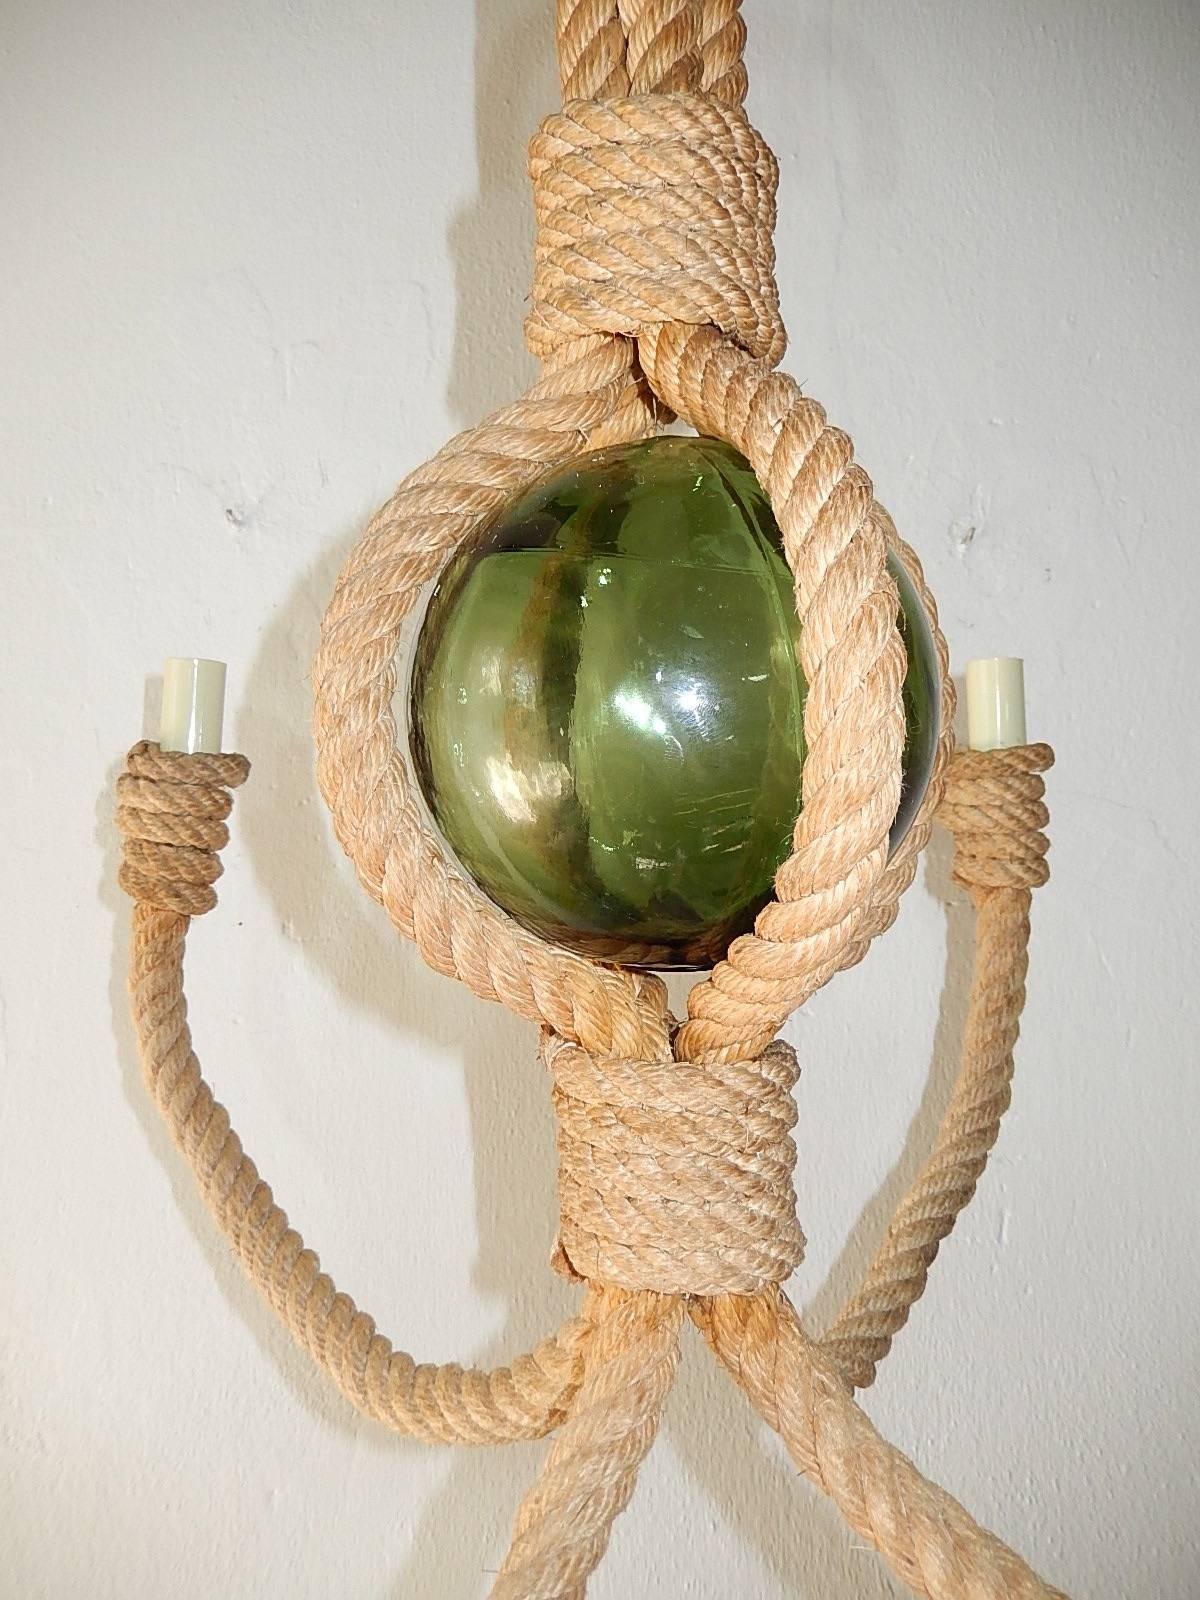 Audoux Minet Rope Chandelier with Green Glass Ball 1